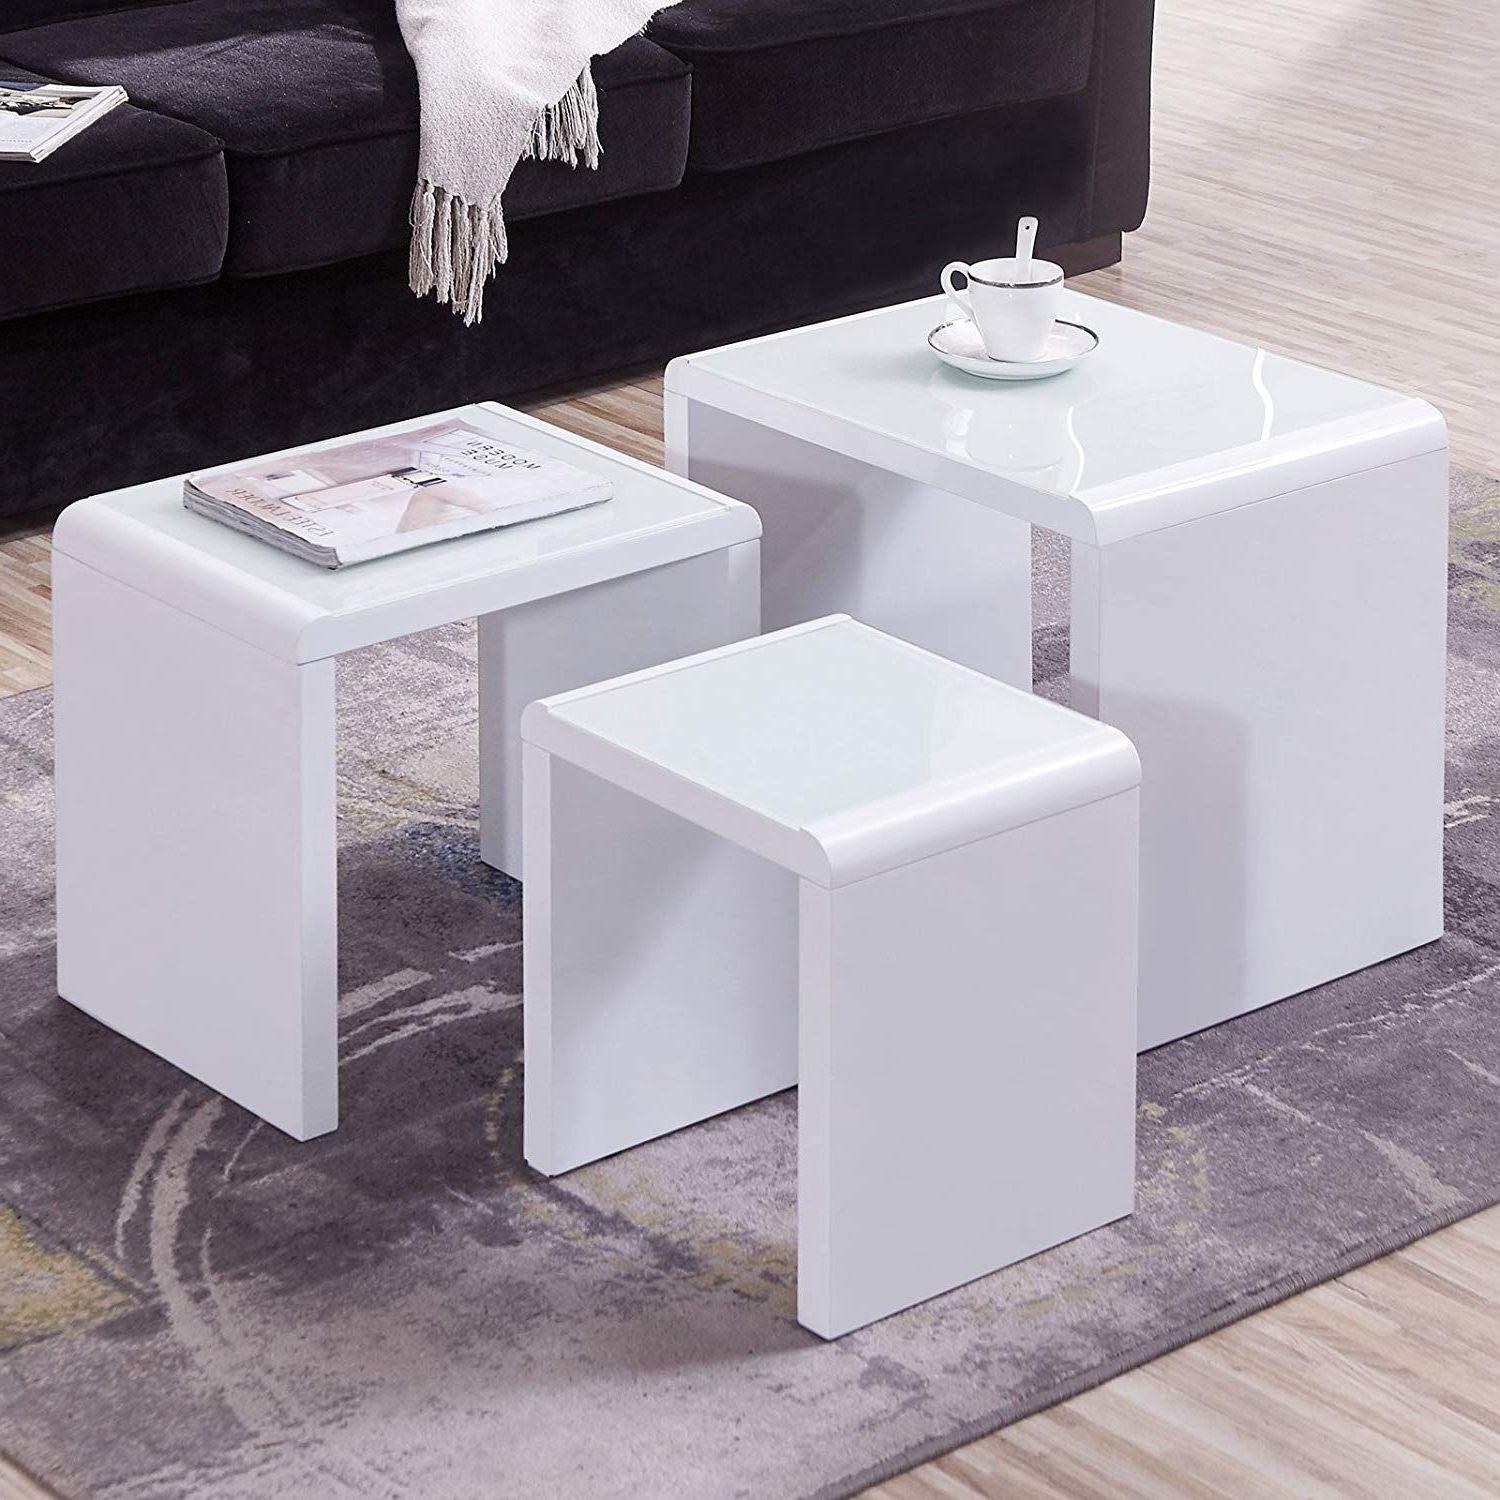 Coffee Tables Of 3 Nesting Tables Within Recent Mecor Nesting Coffee Table 3 Piece Glass Top Side End Table W/high (View 9 of 15)